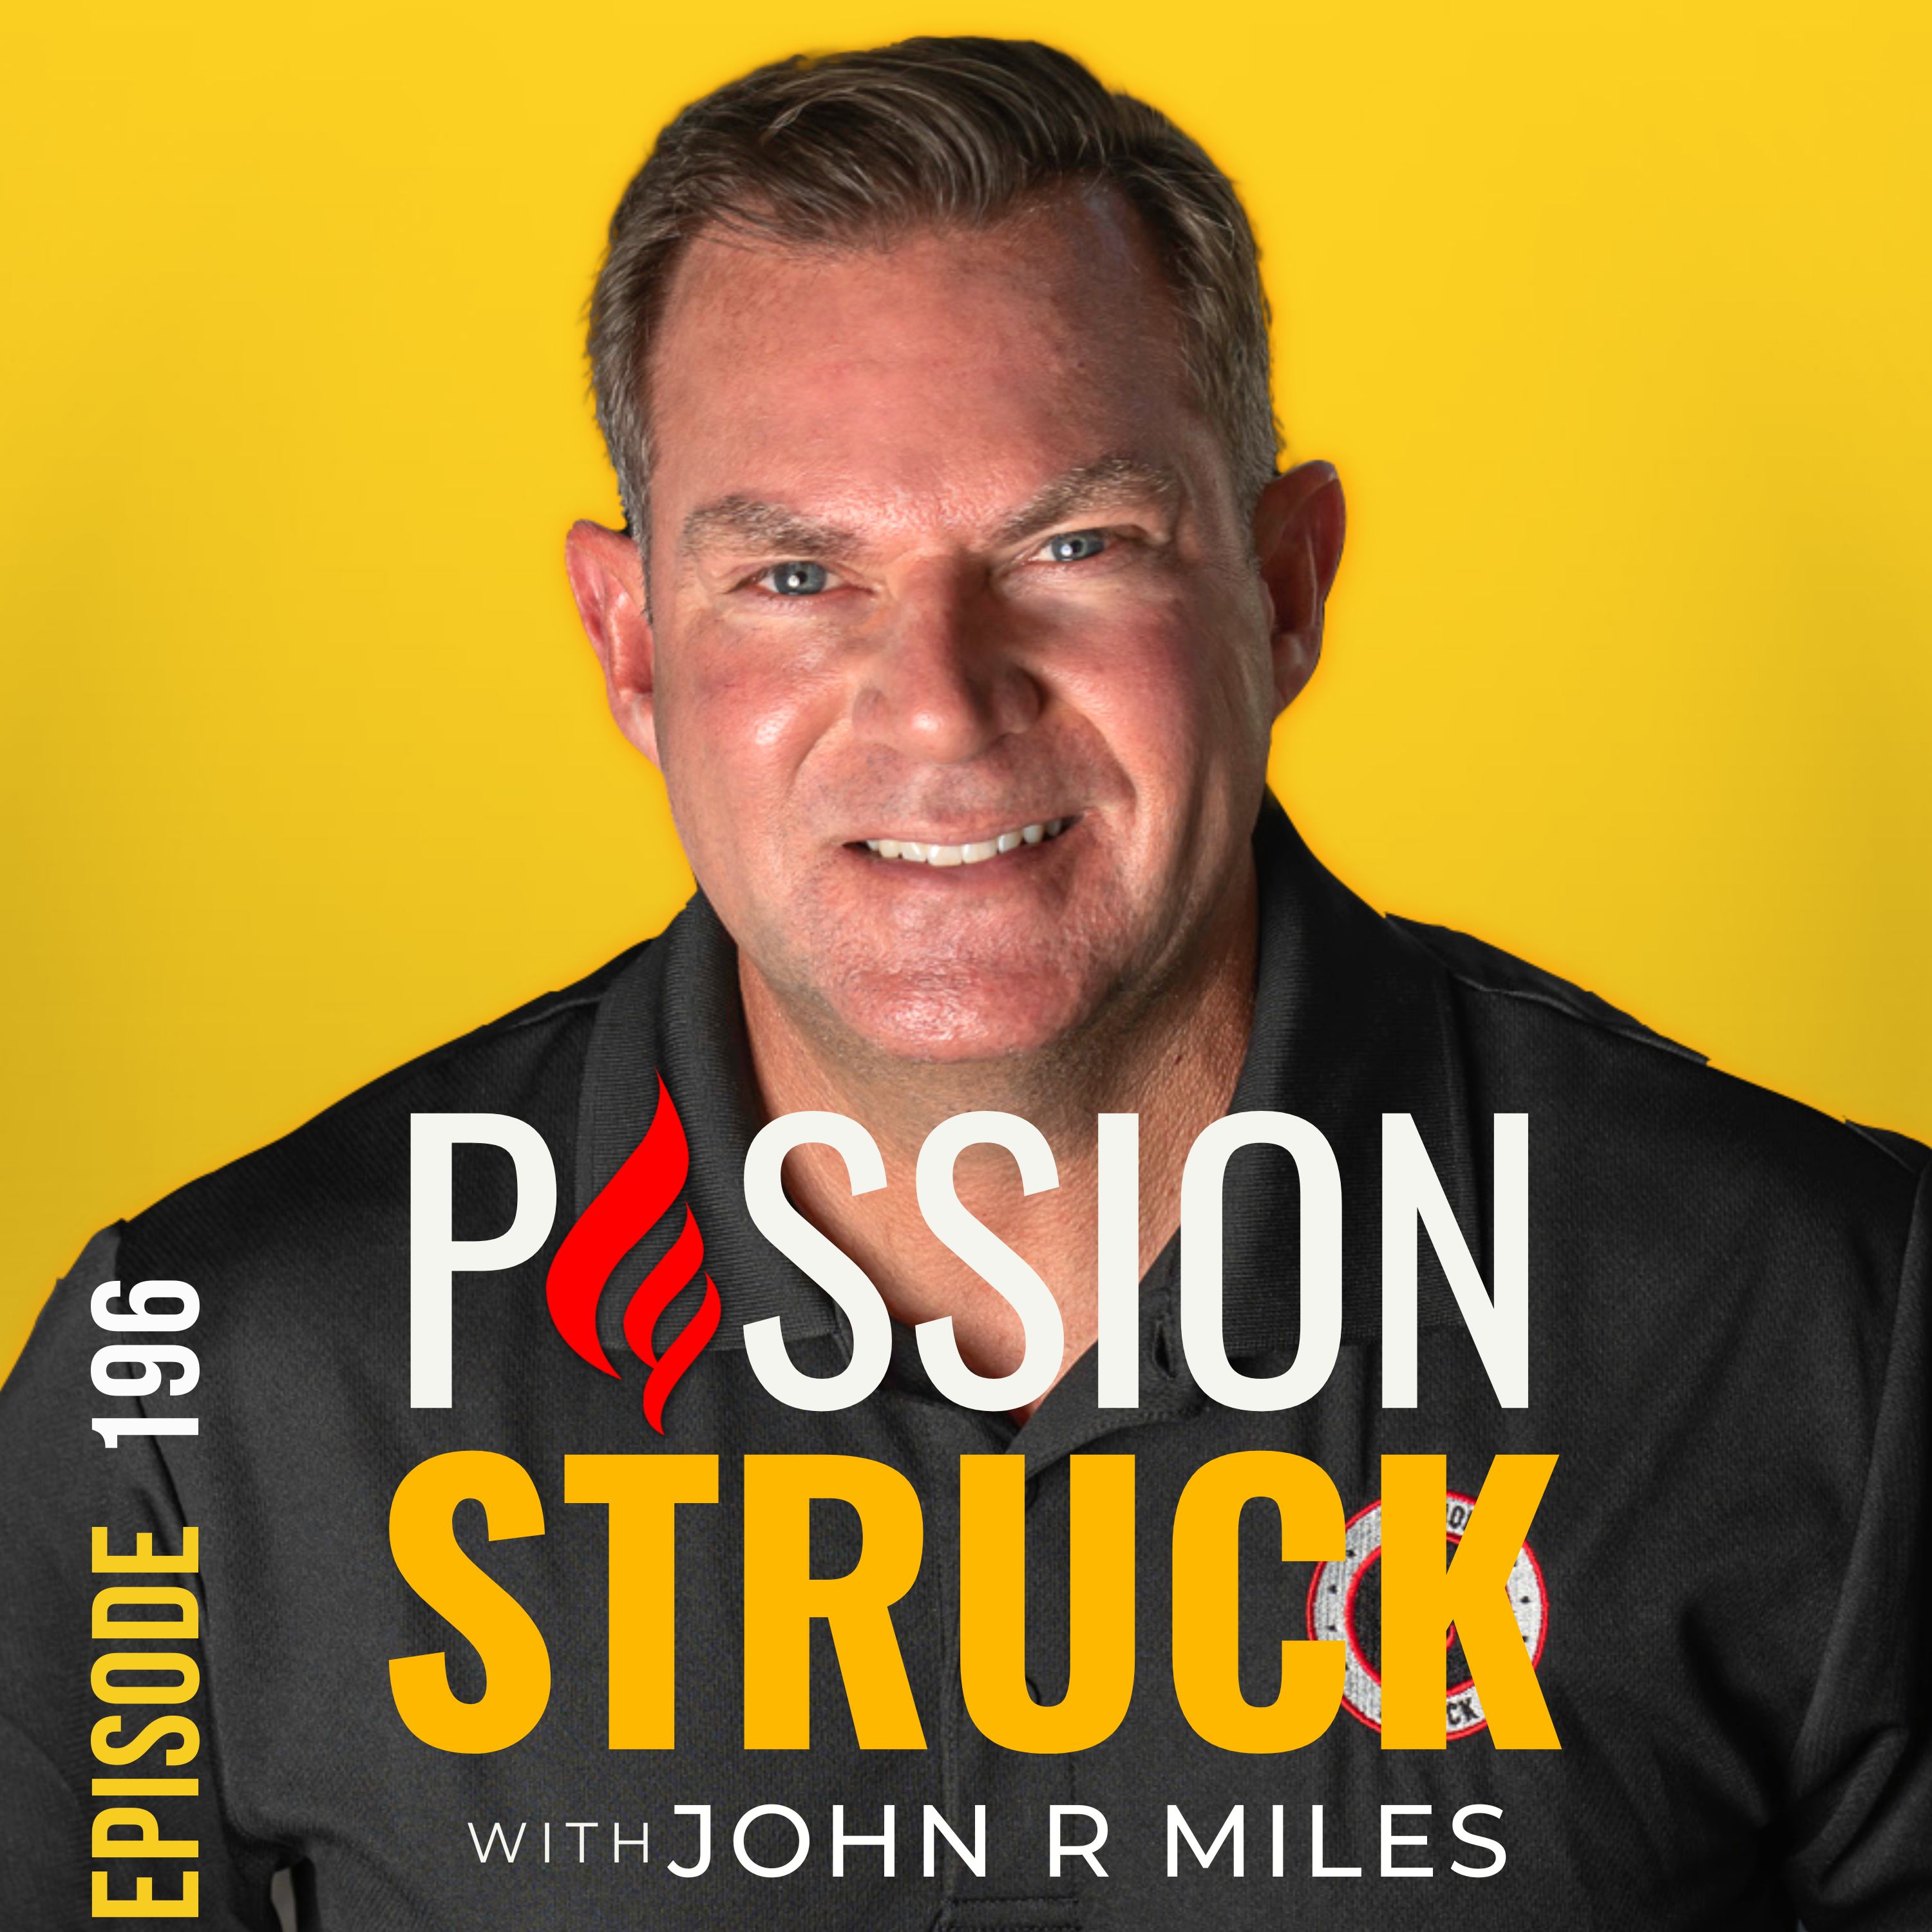 Passion Struck with John R. Miles album cover episode 196 on cognitive biases